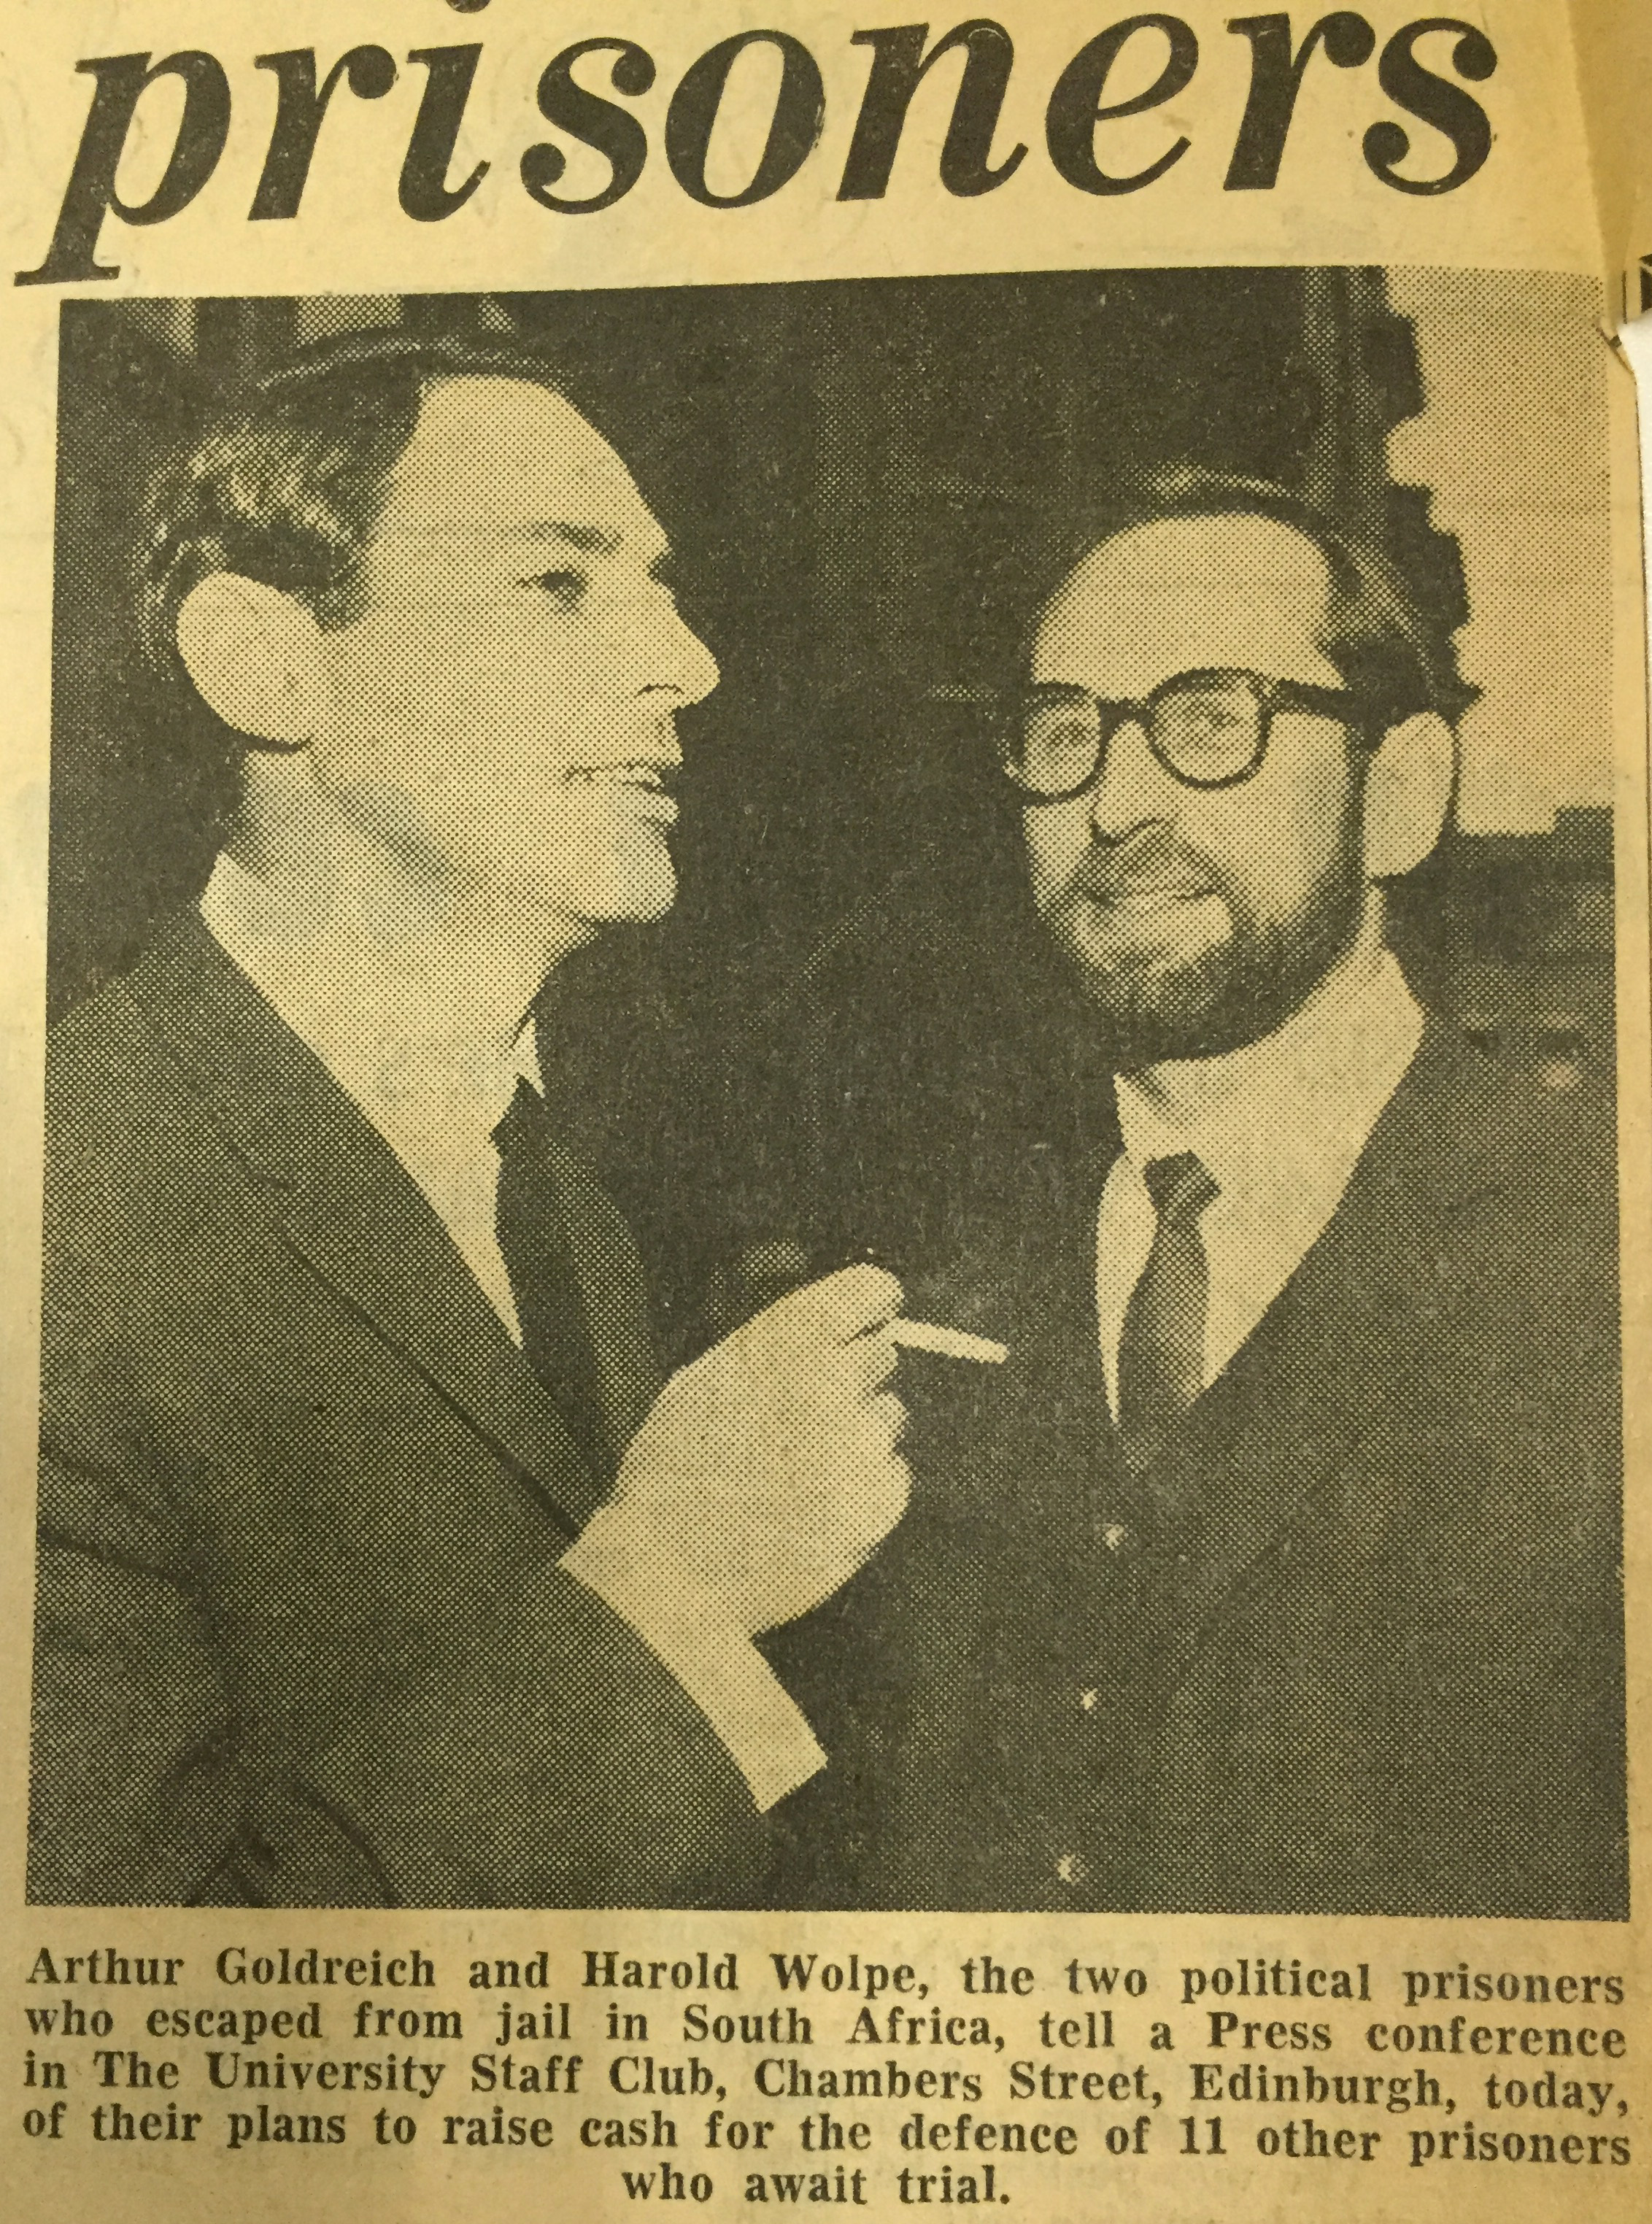 Arthur Goldreich and Harold Wolpe